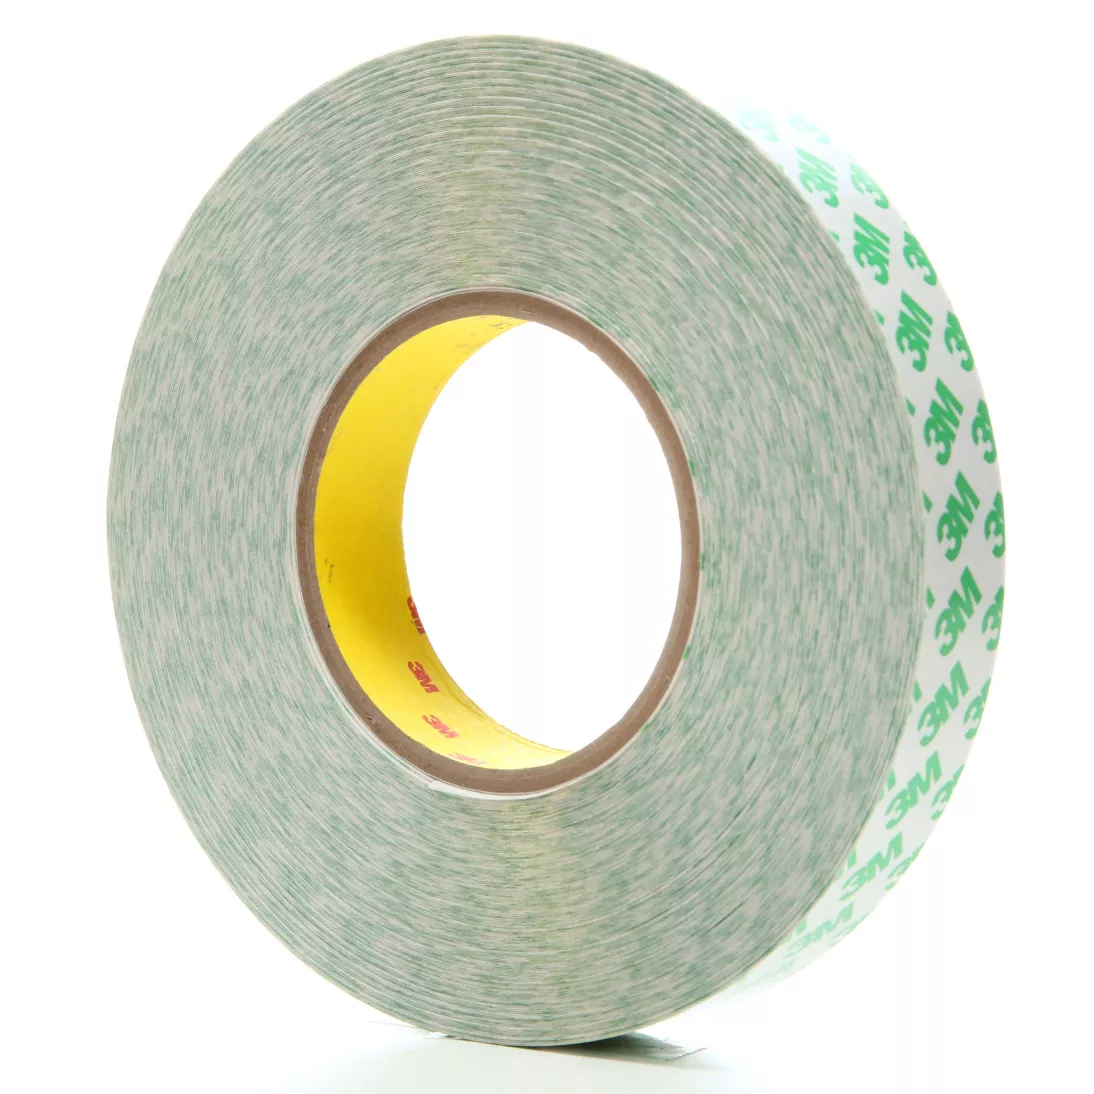 3M™ High Performance Double Coated Tape 9087, White, 1 in x 55 yd, 10.1
mil, 18 rolls per case